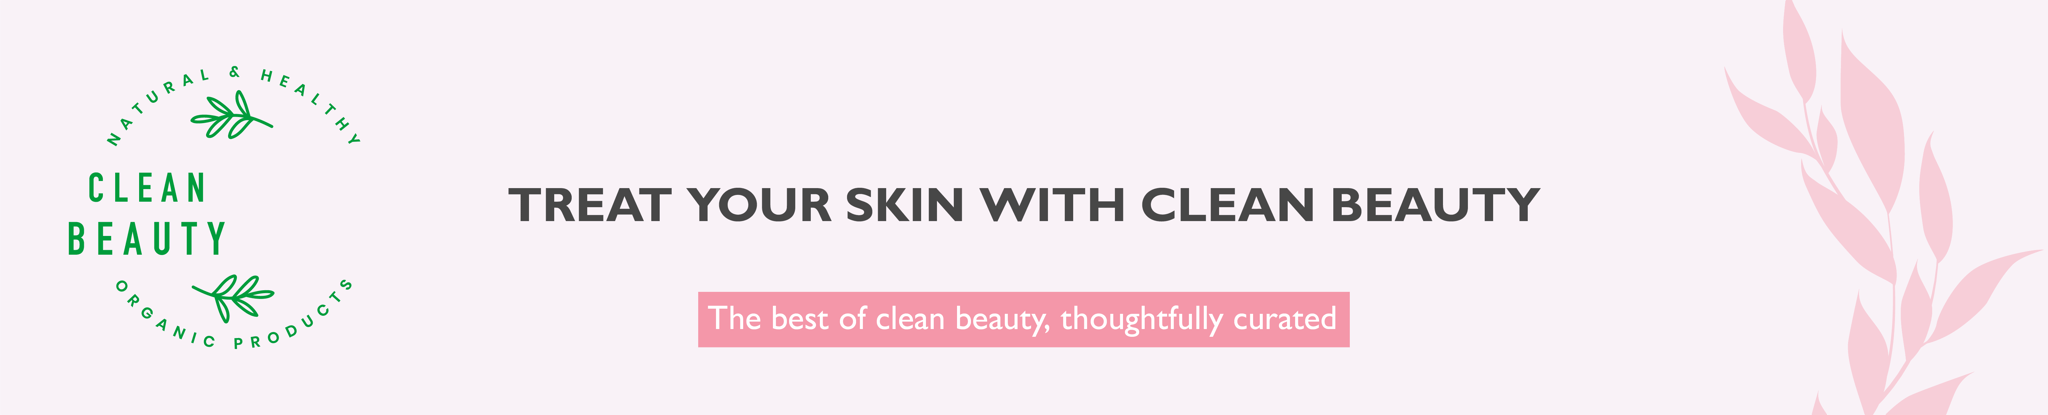 Clean Beauty Items